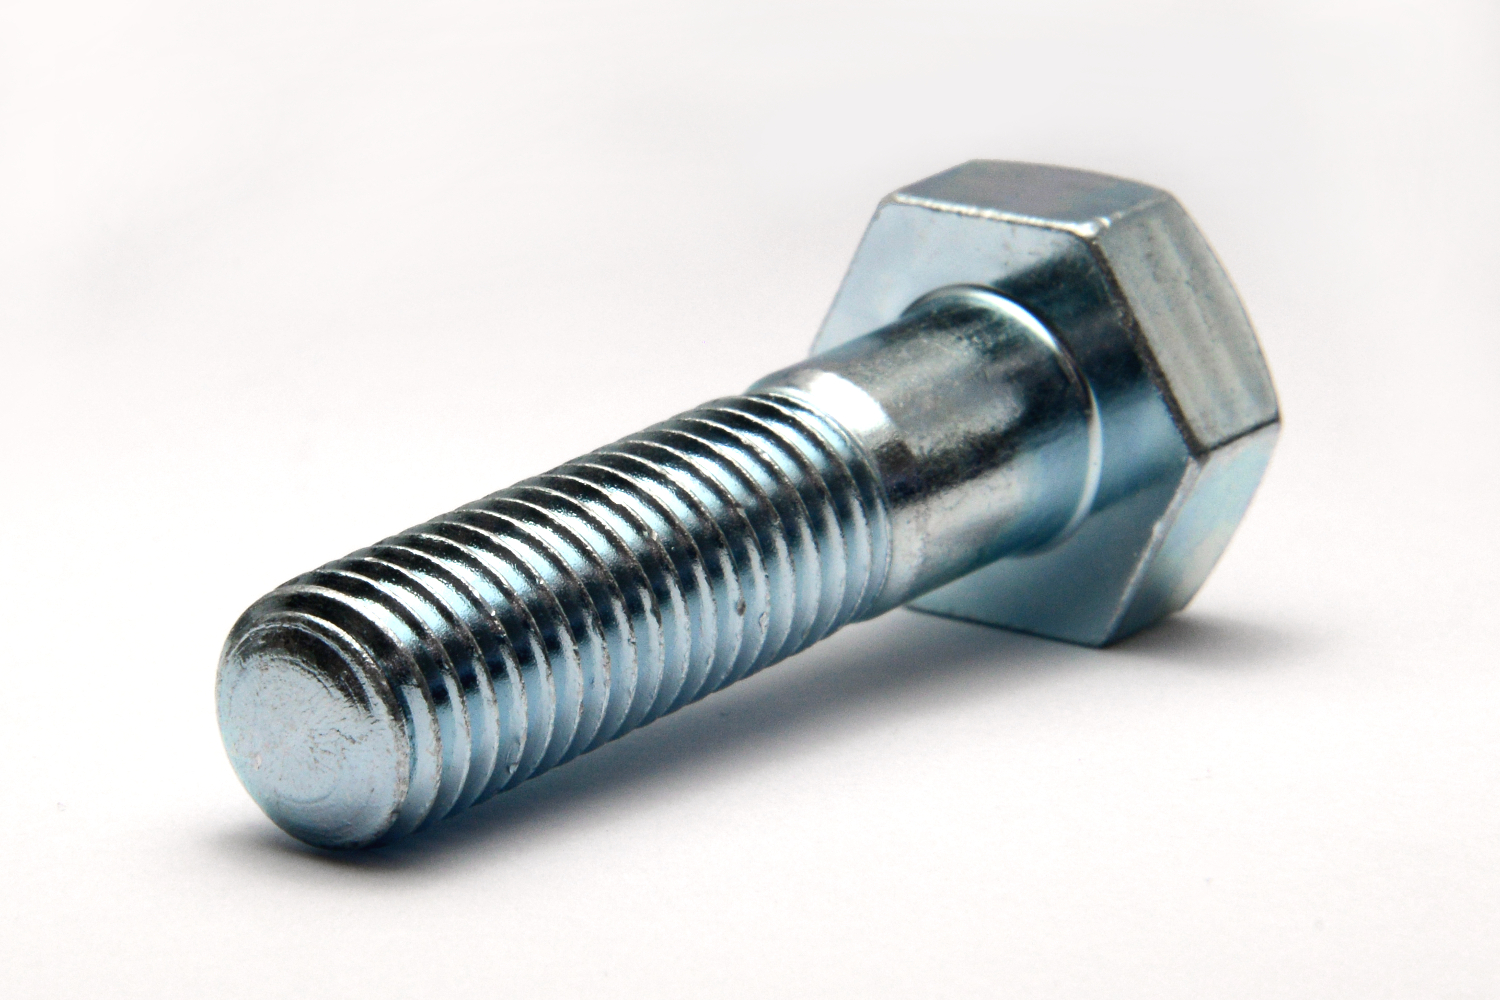 M6 x 20mm Tap Bolts (DIN 933) - 18-8 / 304 Stainless Steel: Accu.co.uk:  Precision Screws